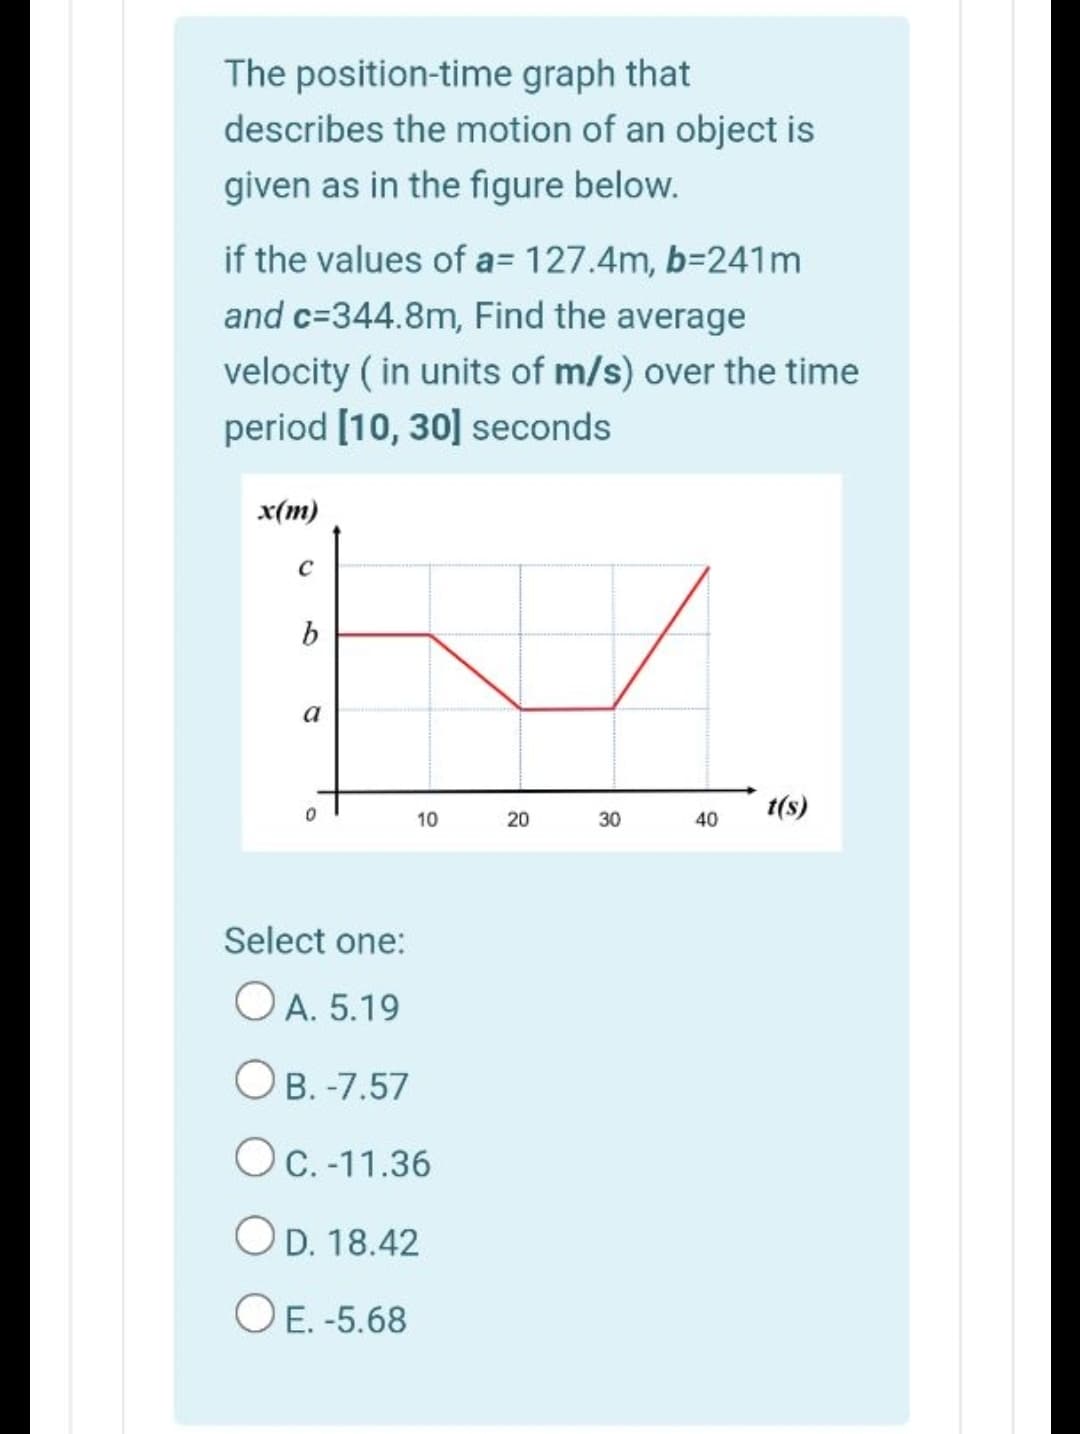 The position-time graph that
describes the motion of an object is
given as in the figure below.
if the values of a= 127.4m, b=241m
and c=344.8m, Find the average
velocity ( in units of m/s) over the time
period [10, 30] seconds
x(m)
C
a
1(s)
10
20
30
40
Select one:
O A. 5.19
Ов. -7.57
OC. -11.36
OD. 18.42
O E. -5.68
